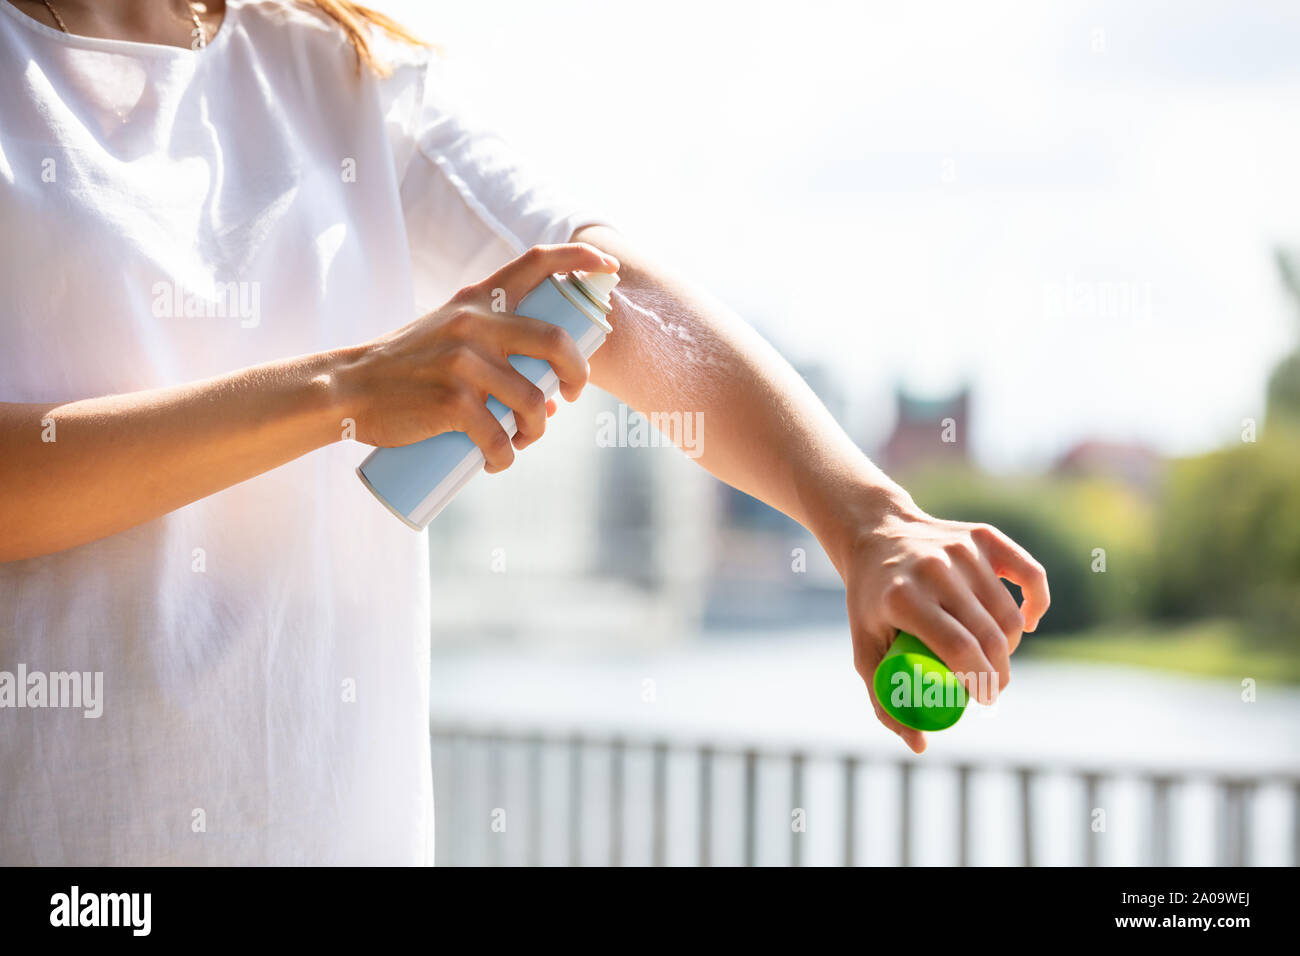 Close-up Of A Woman's Hand Spraying Anti Insect Deet Spray On Skin Outdoors Stock Photo